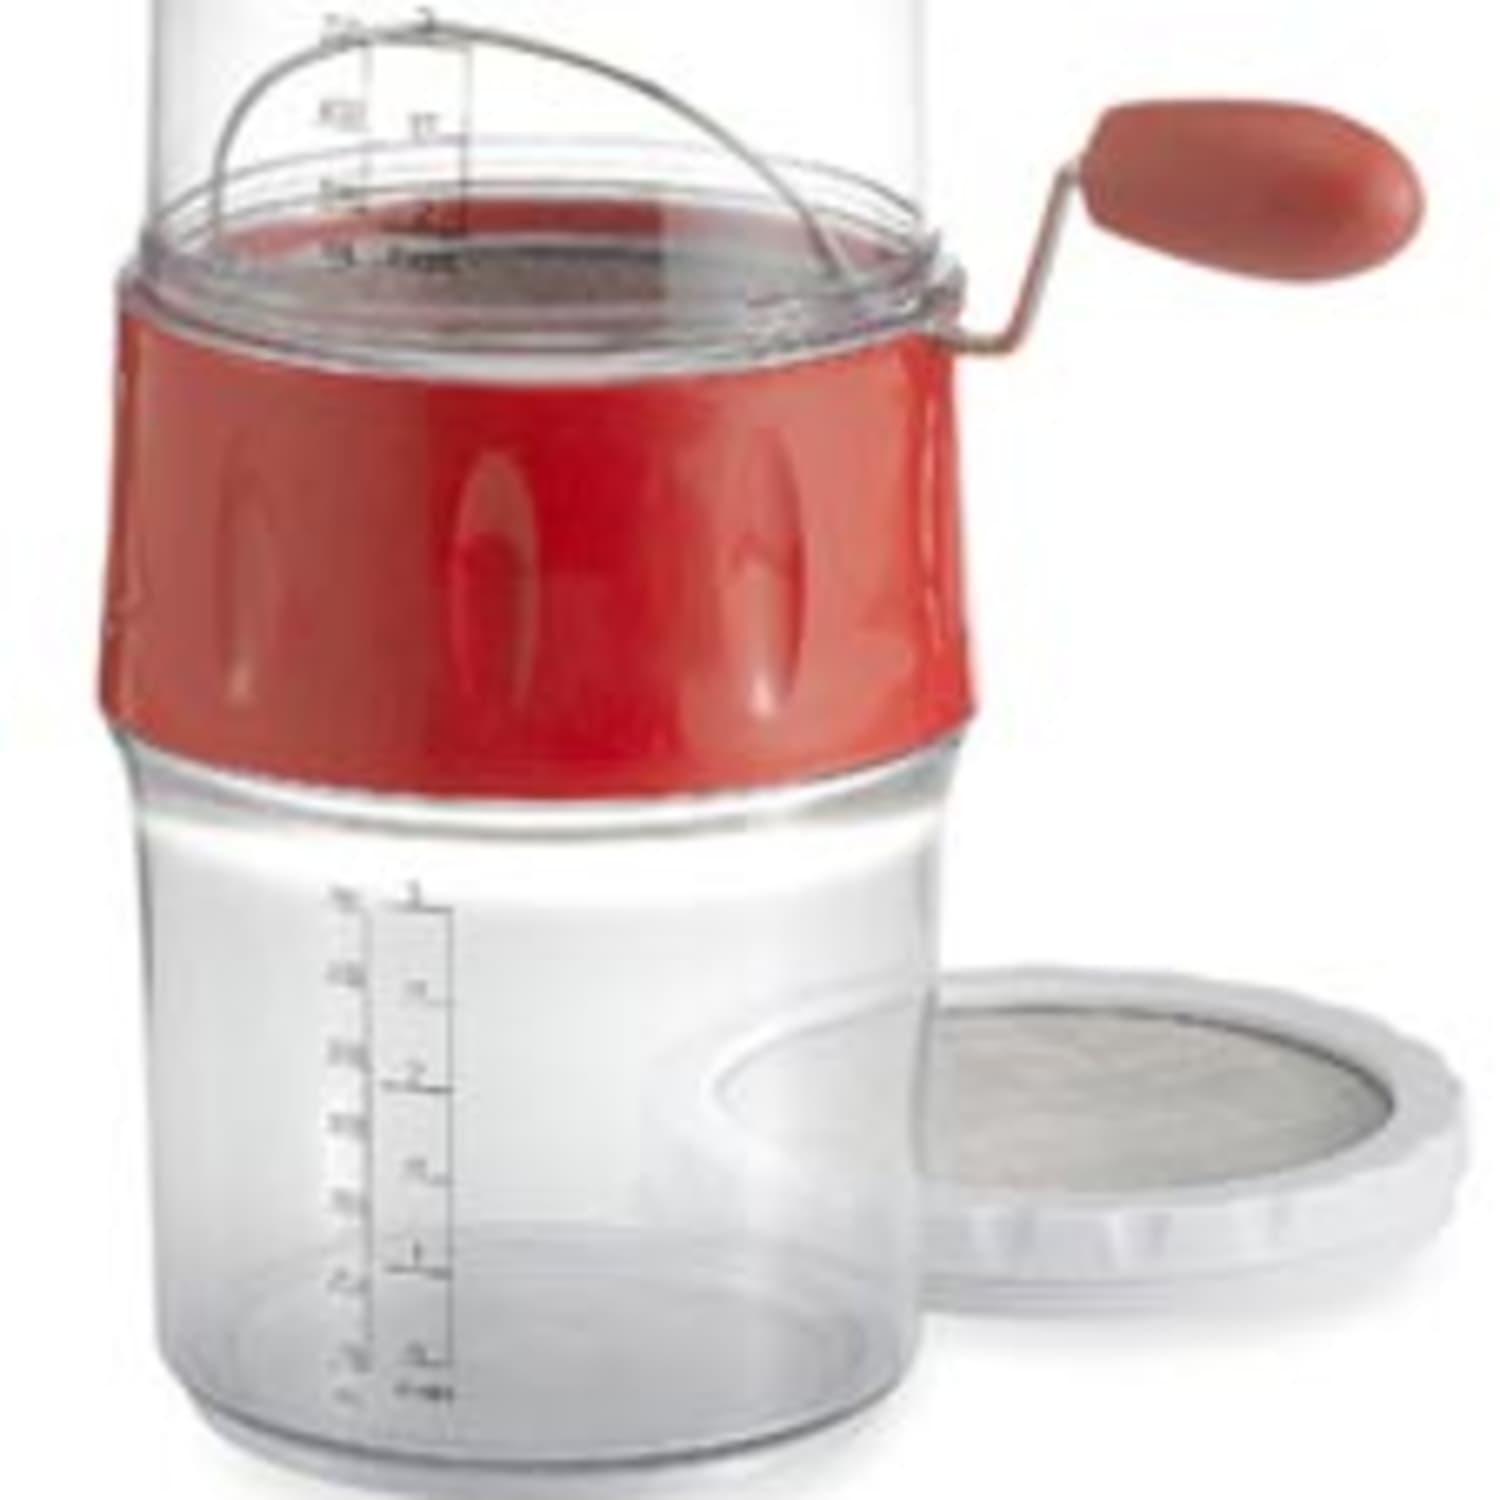 Williams Sonoma Flour Sifter, Baking Tools